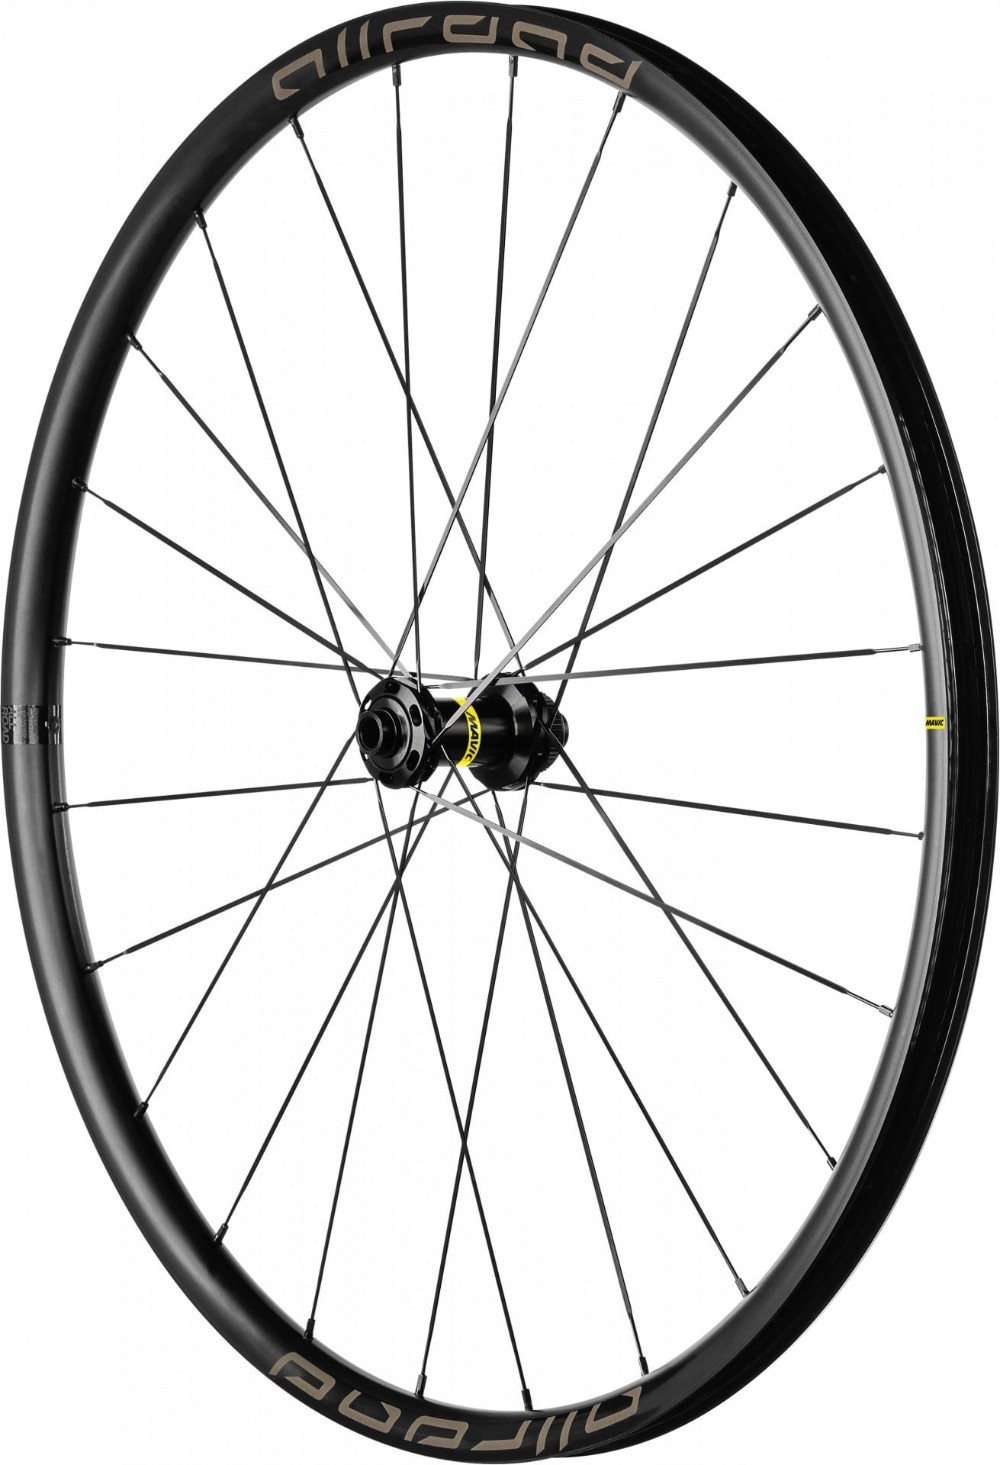 Allroad DCL 650b Wheelset image 2